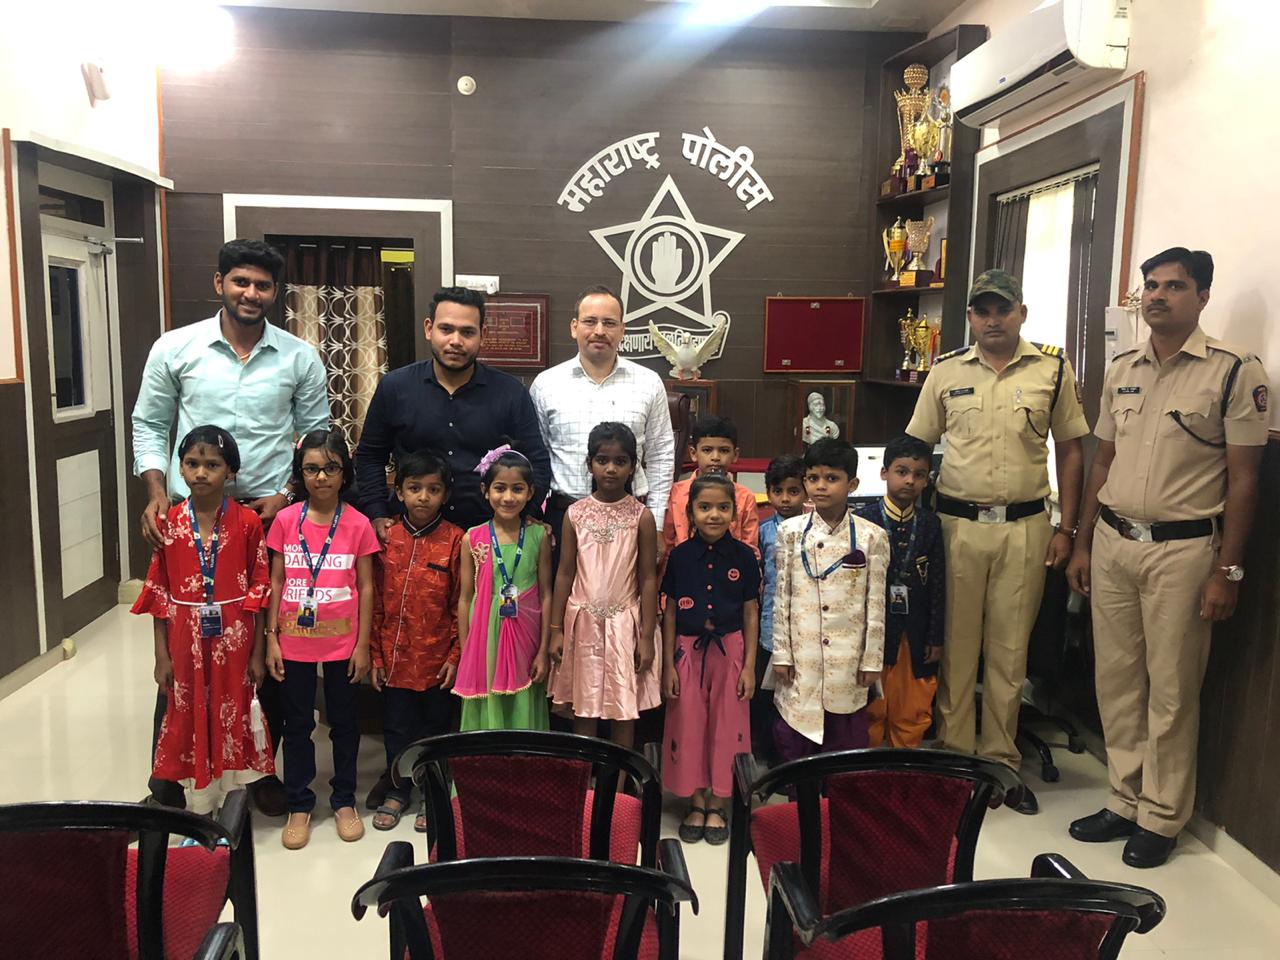 group-photo-with-police-officer-and-some-vijaya-convent-sutdents